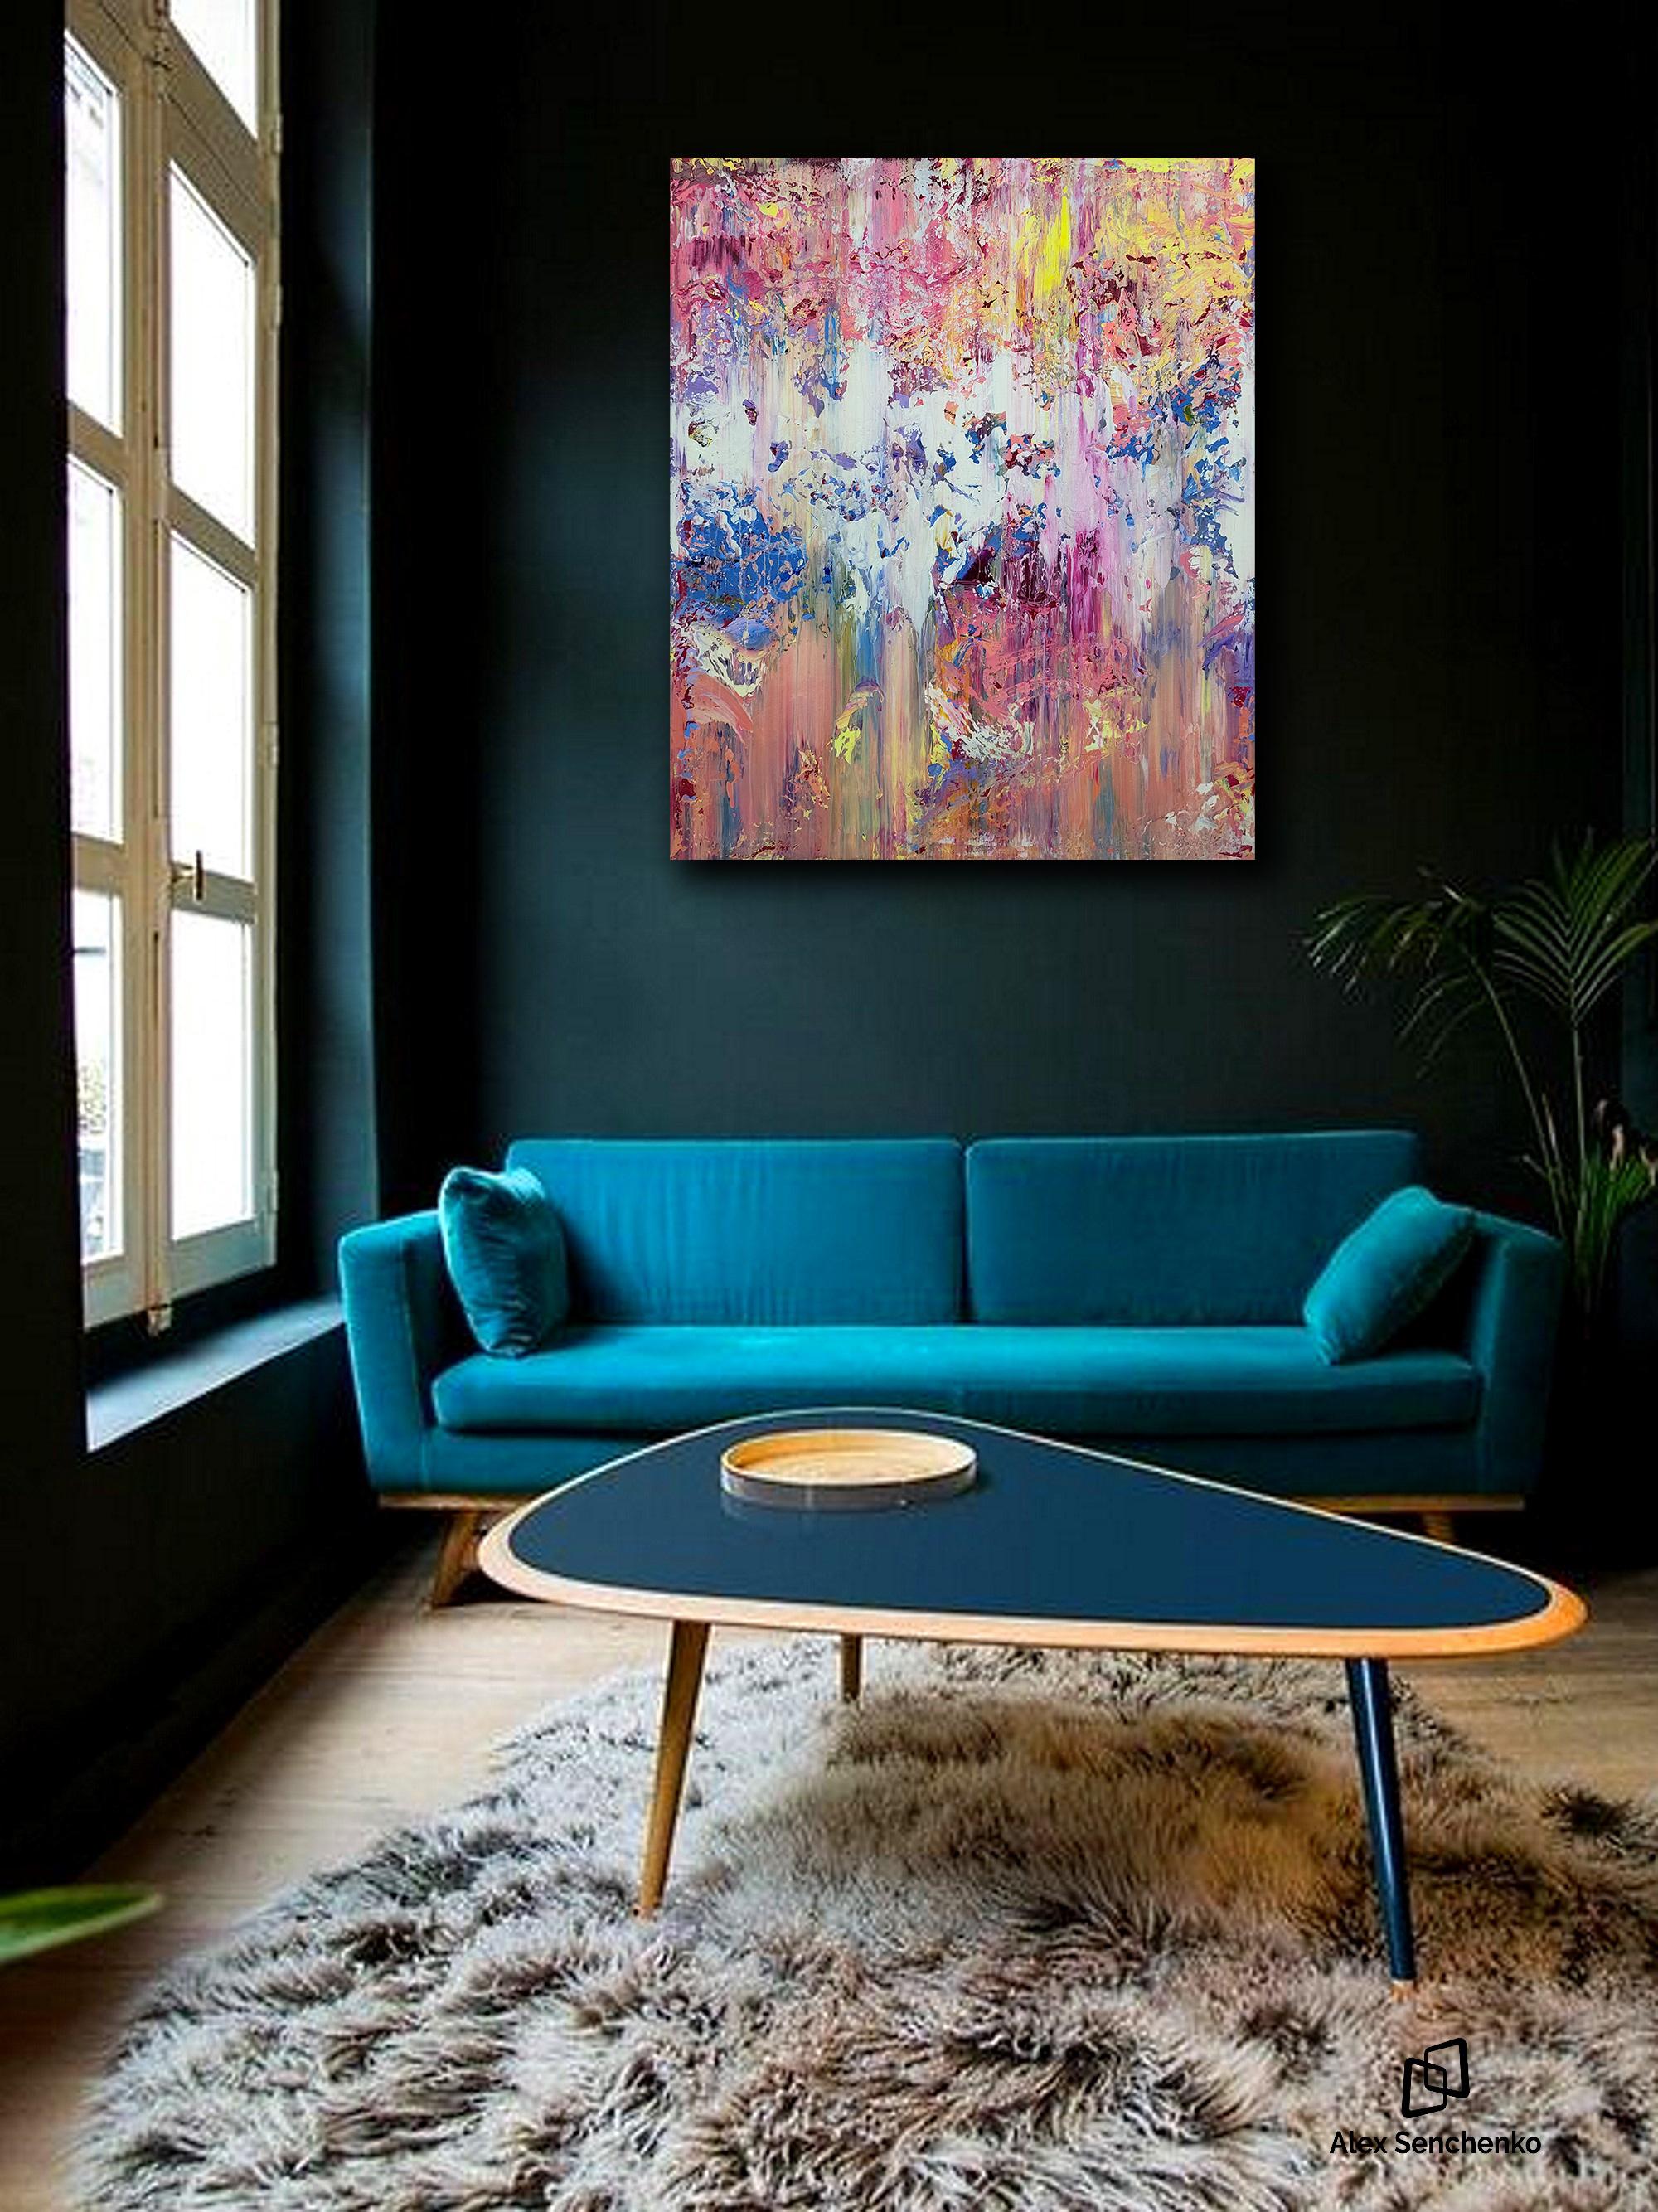 Immerse yourself in the radiance of 'Abstract 23102,' a modern painting that exudes an abundance of positive energy. Awash with bright and exuberant strokes of paint, this artwork is a visual celebration of joy and optimism. The thick, textured